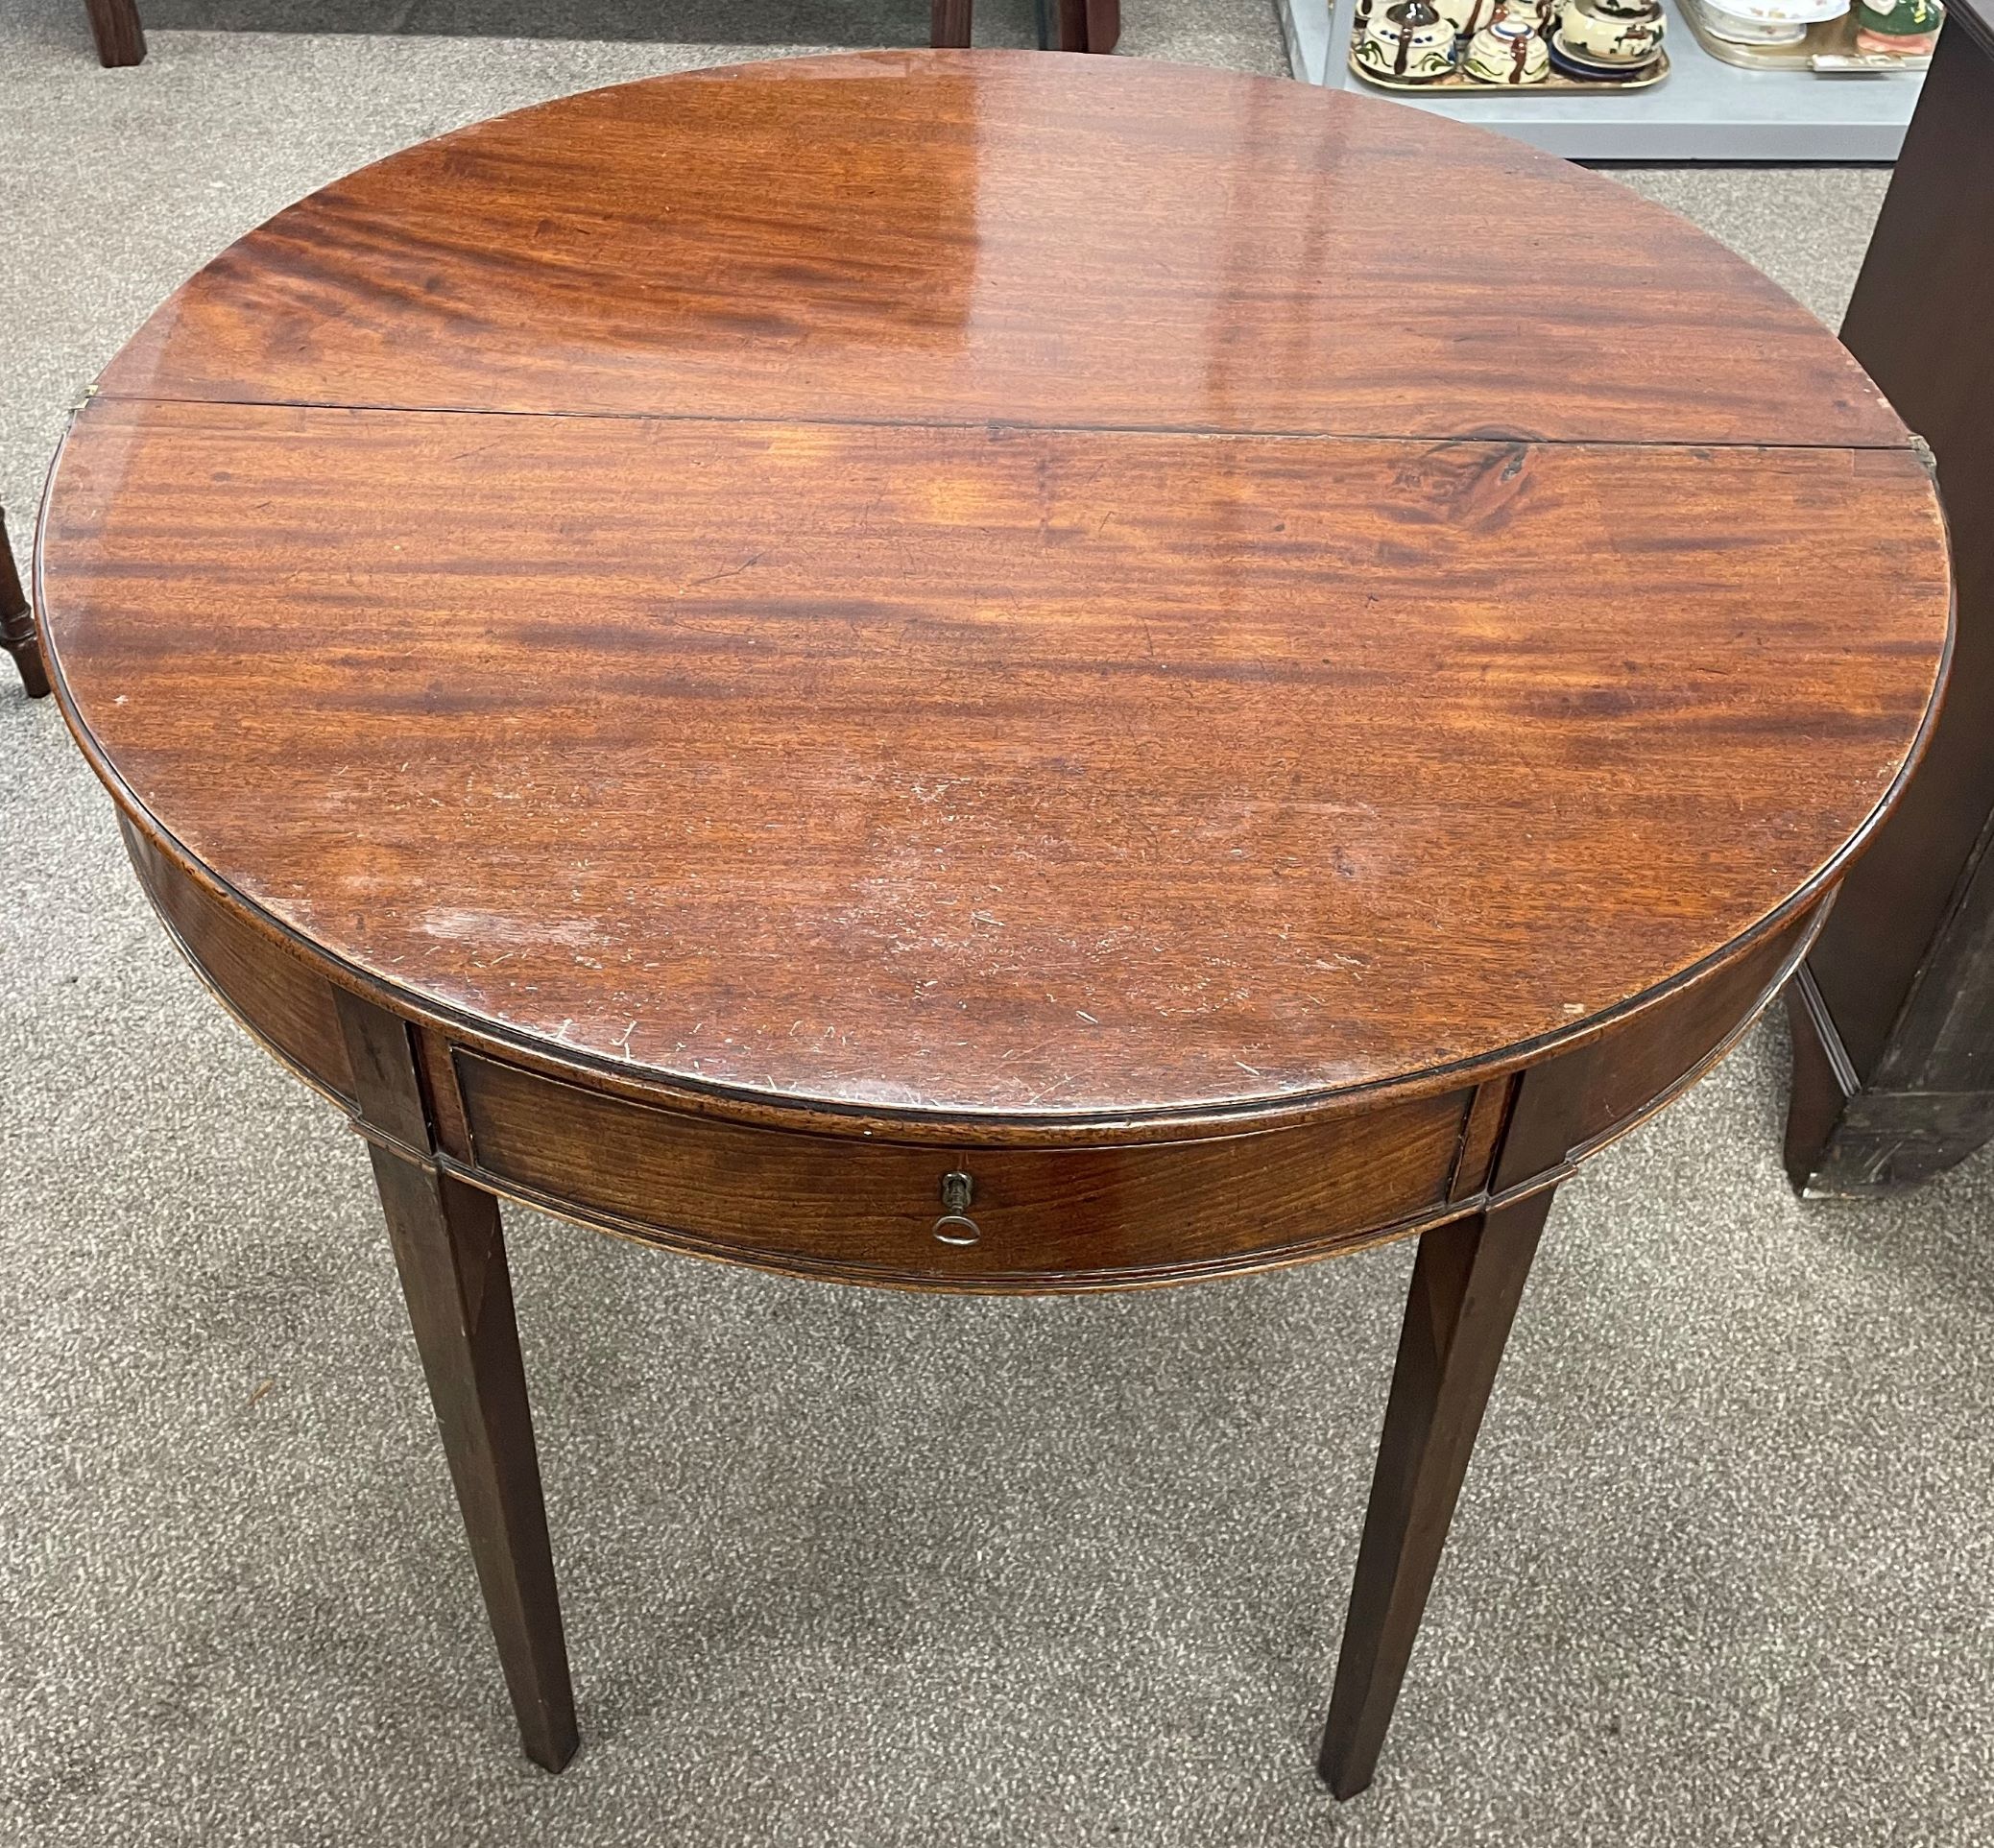 George III demi-lune fold over breakfast table in mahogany W 100cm Ht 72cm - Image 2 of 3